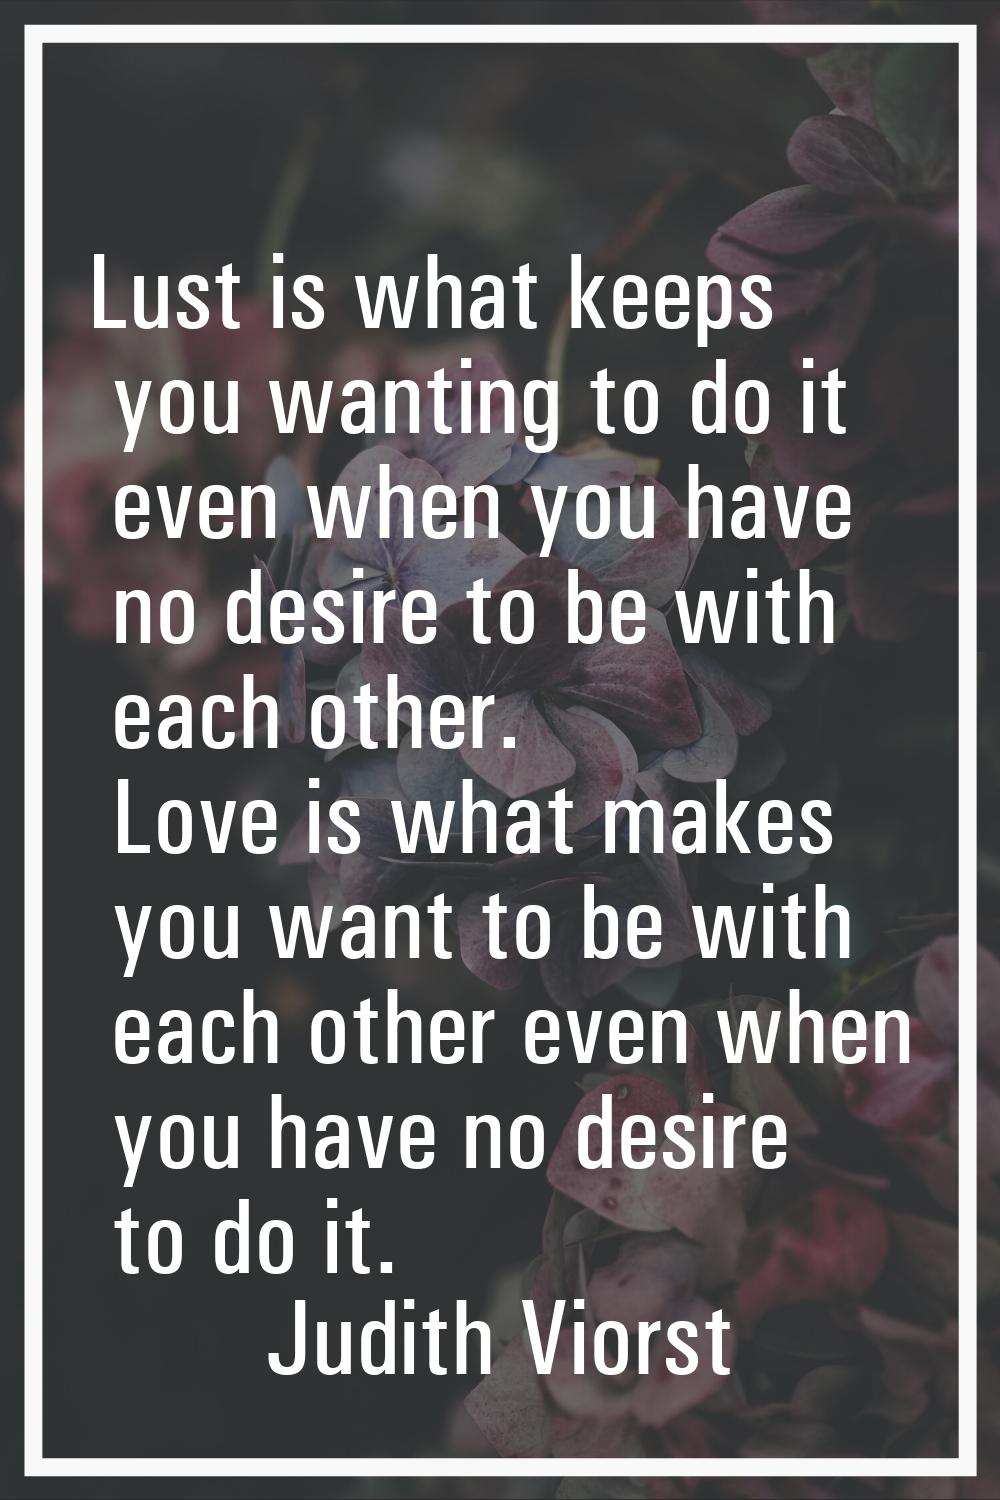 Lust is what keeps you wanting to do it even when you have no desire to be with each other. Love is